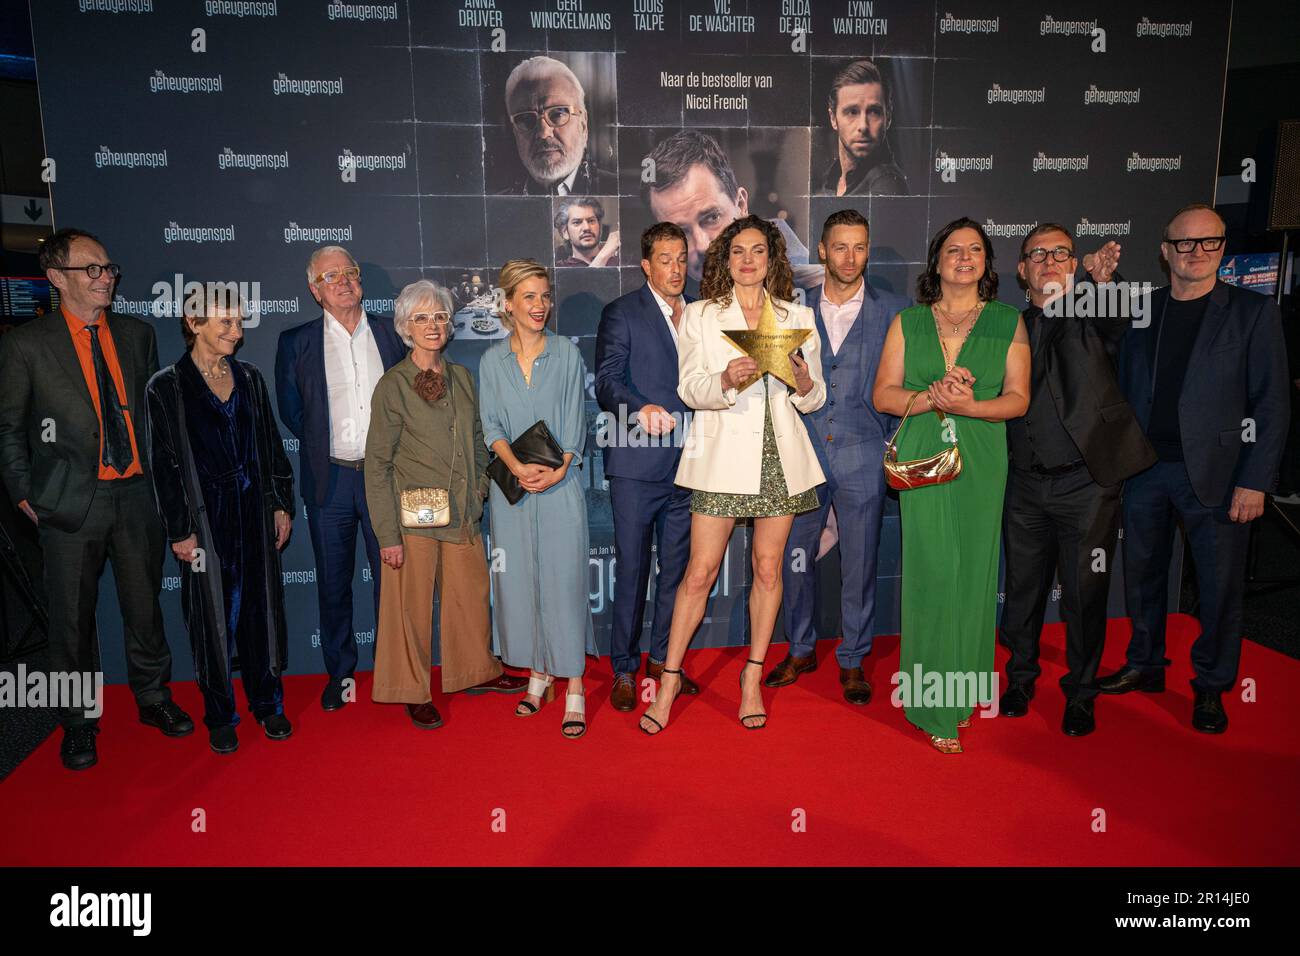 Brussels, Belgium. 11th May, 2023. The cast, directors and writers Nicci  Gerrard and Sean French, togehter 'Nicci French' pose for the photographer  during the opening night of the movie 'Het Geheugenspel', at